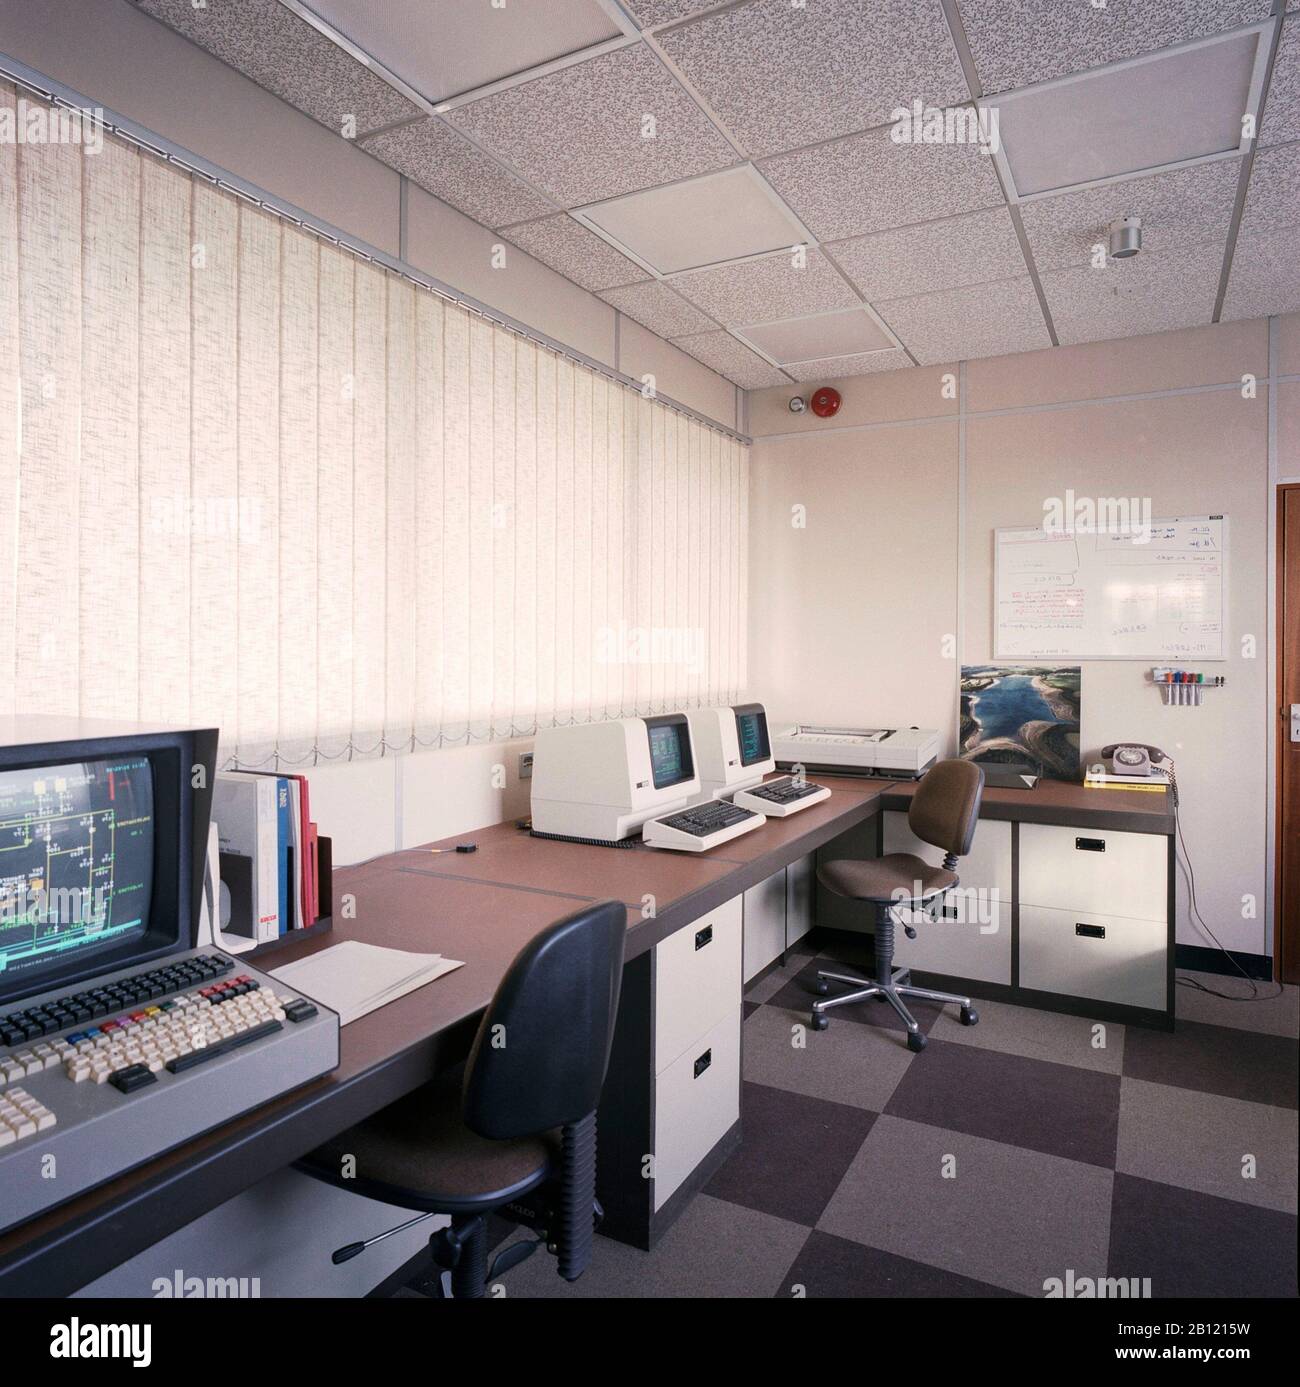 1985 computer control system, West Yorkshire, northern England, UK Stock Photo